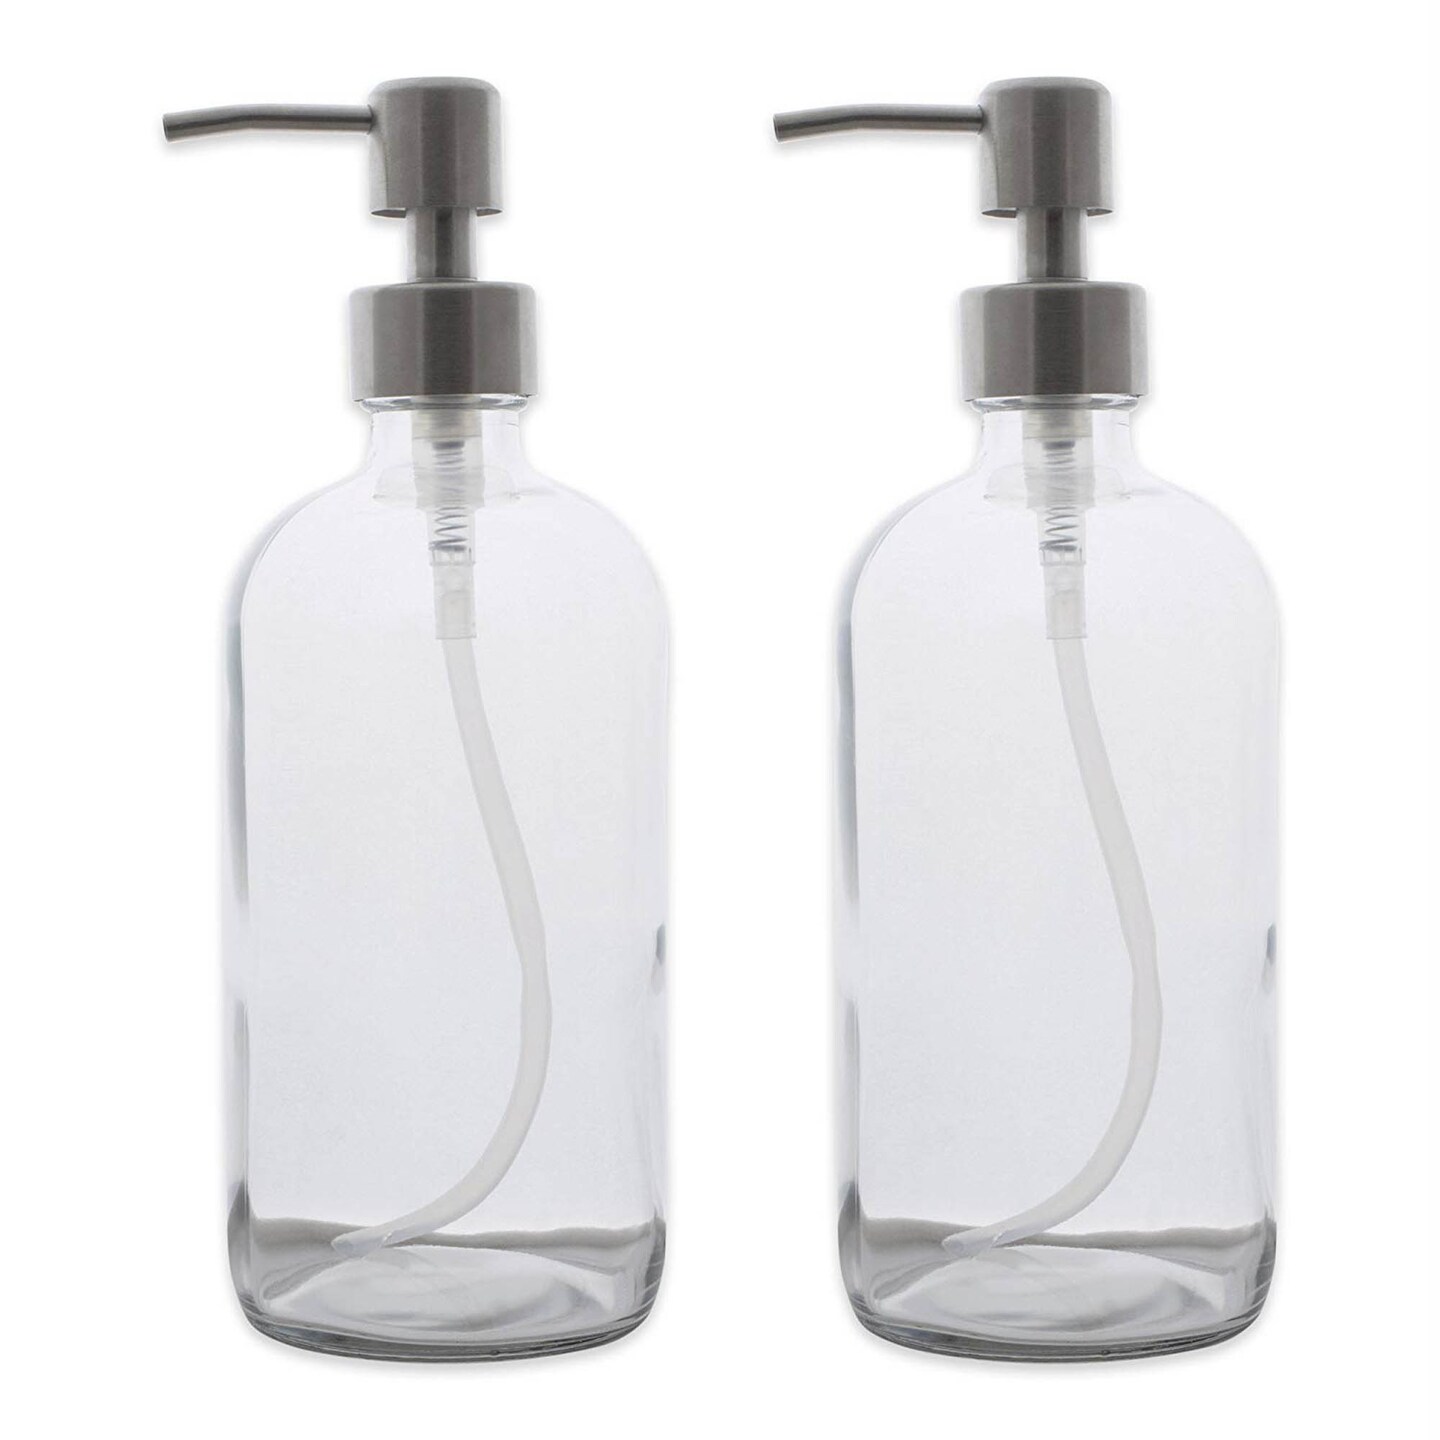 DII 2-Piece 16oz Clear Glass Bottle Set With Stainless Pump Tops